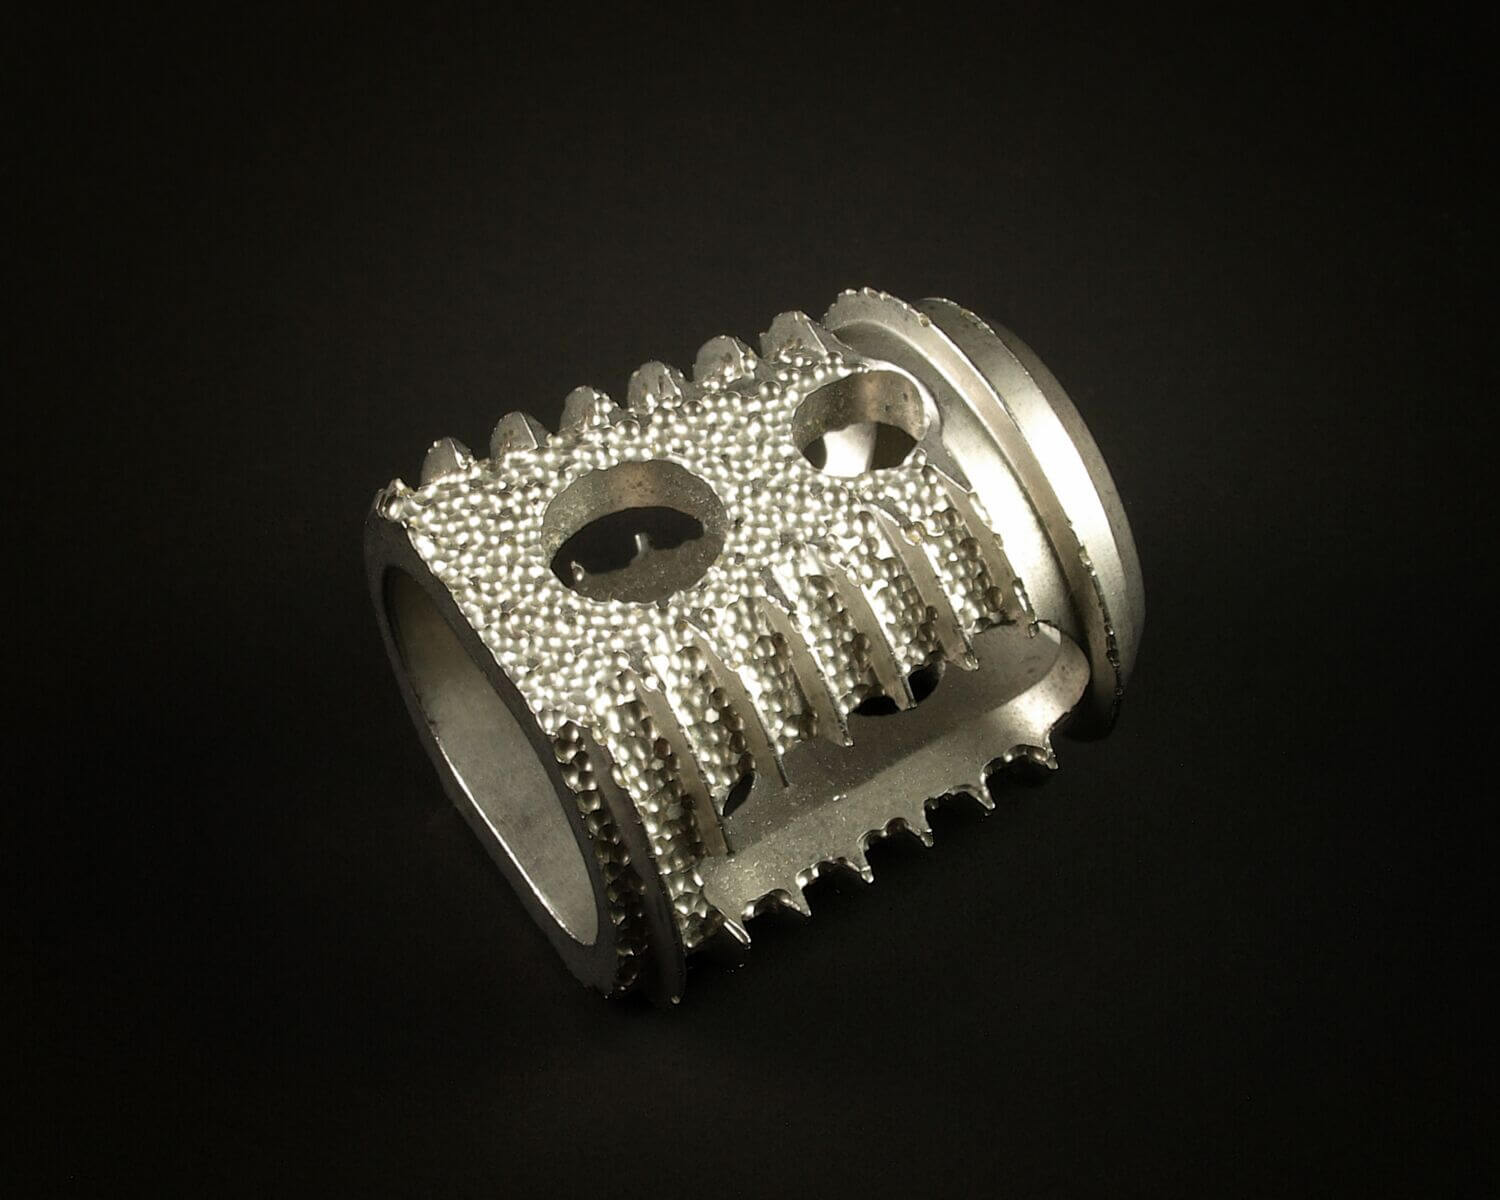 Etched Spinal Implant Components  - Spinal Implant Component Machining